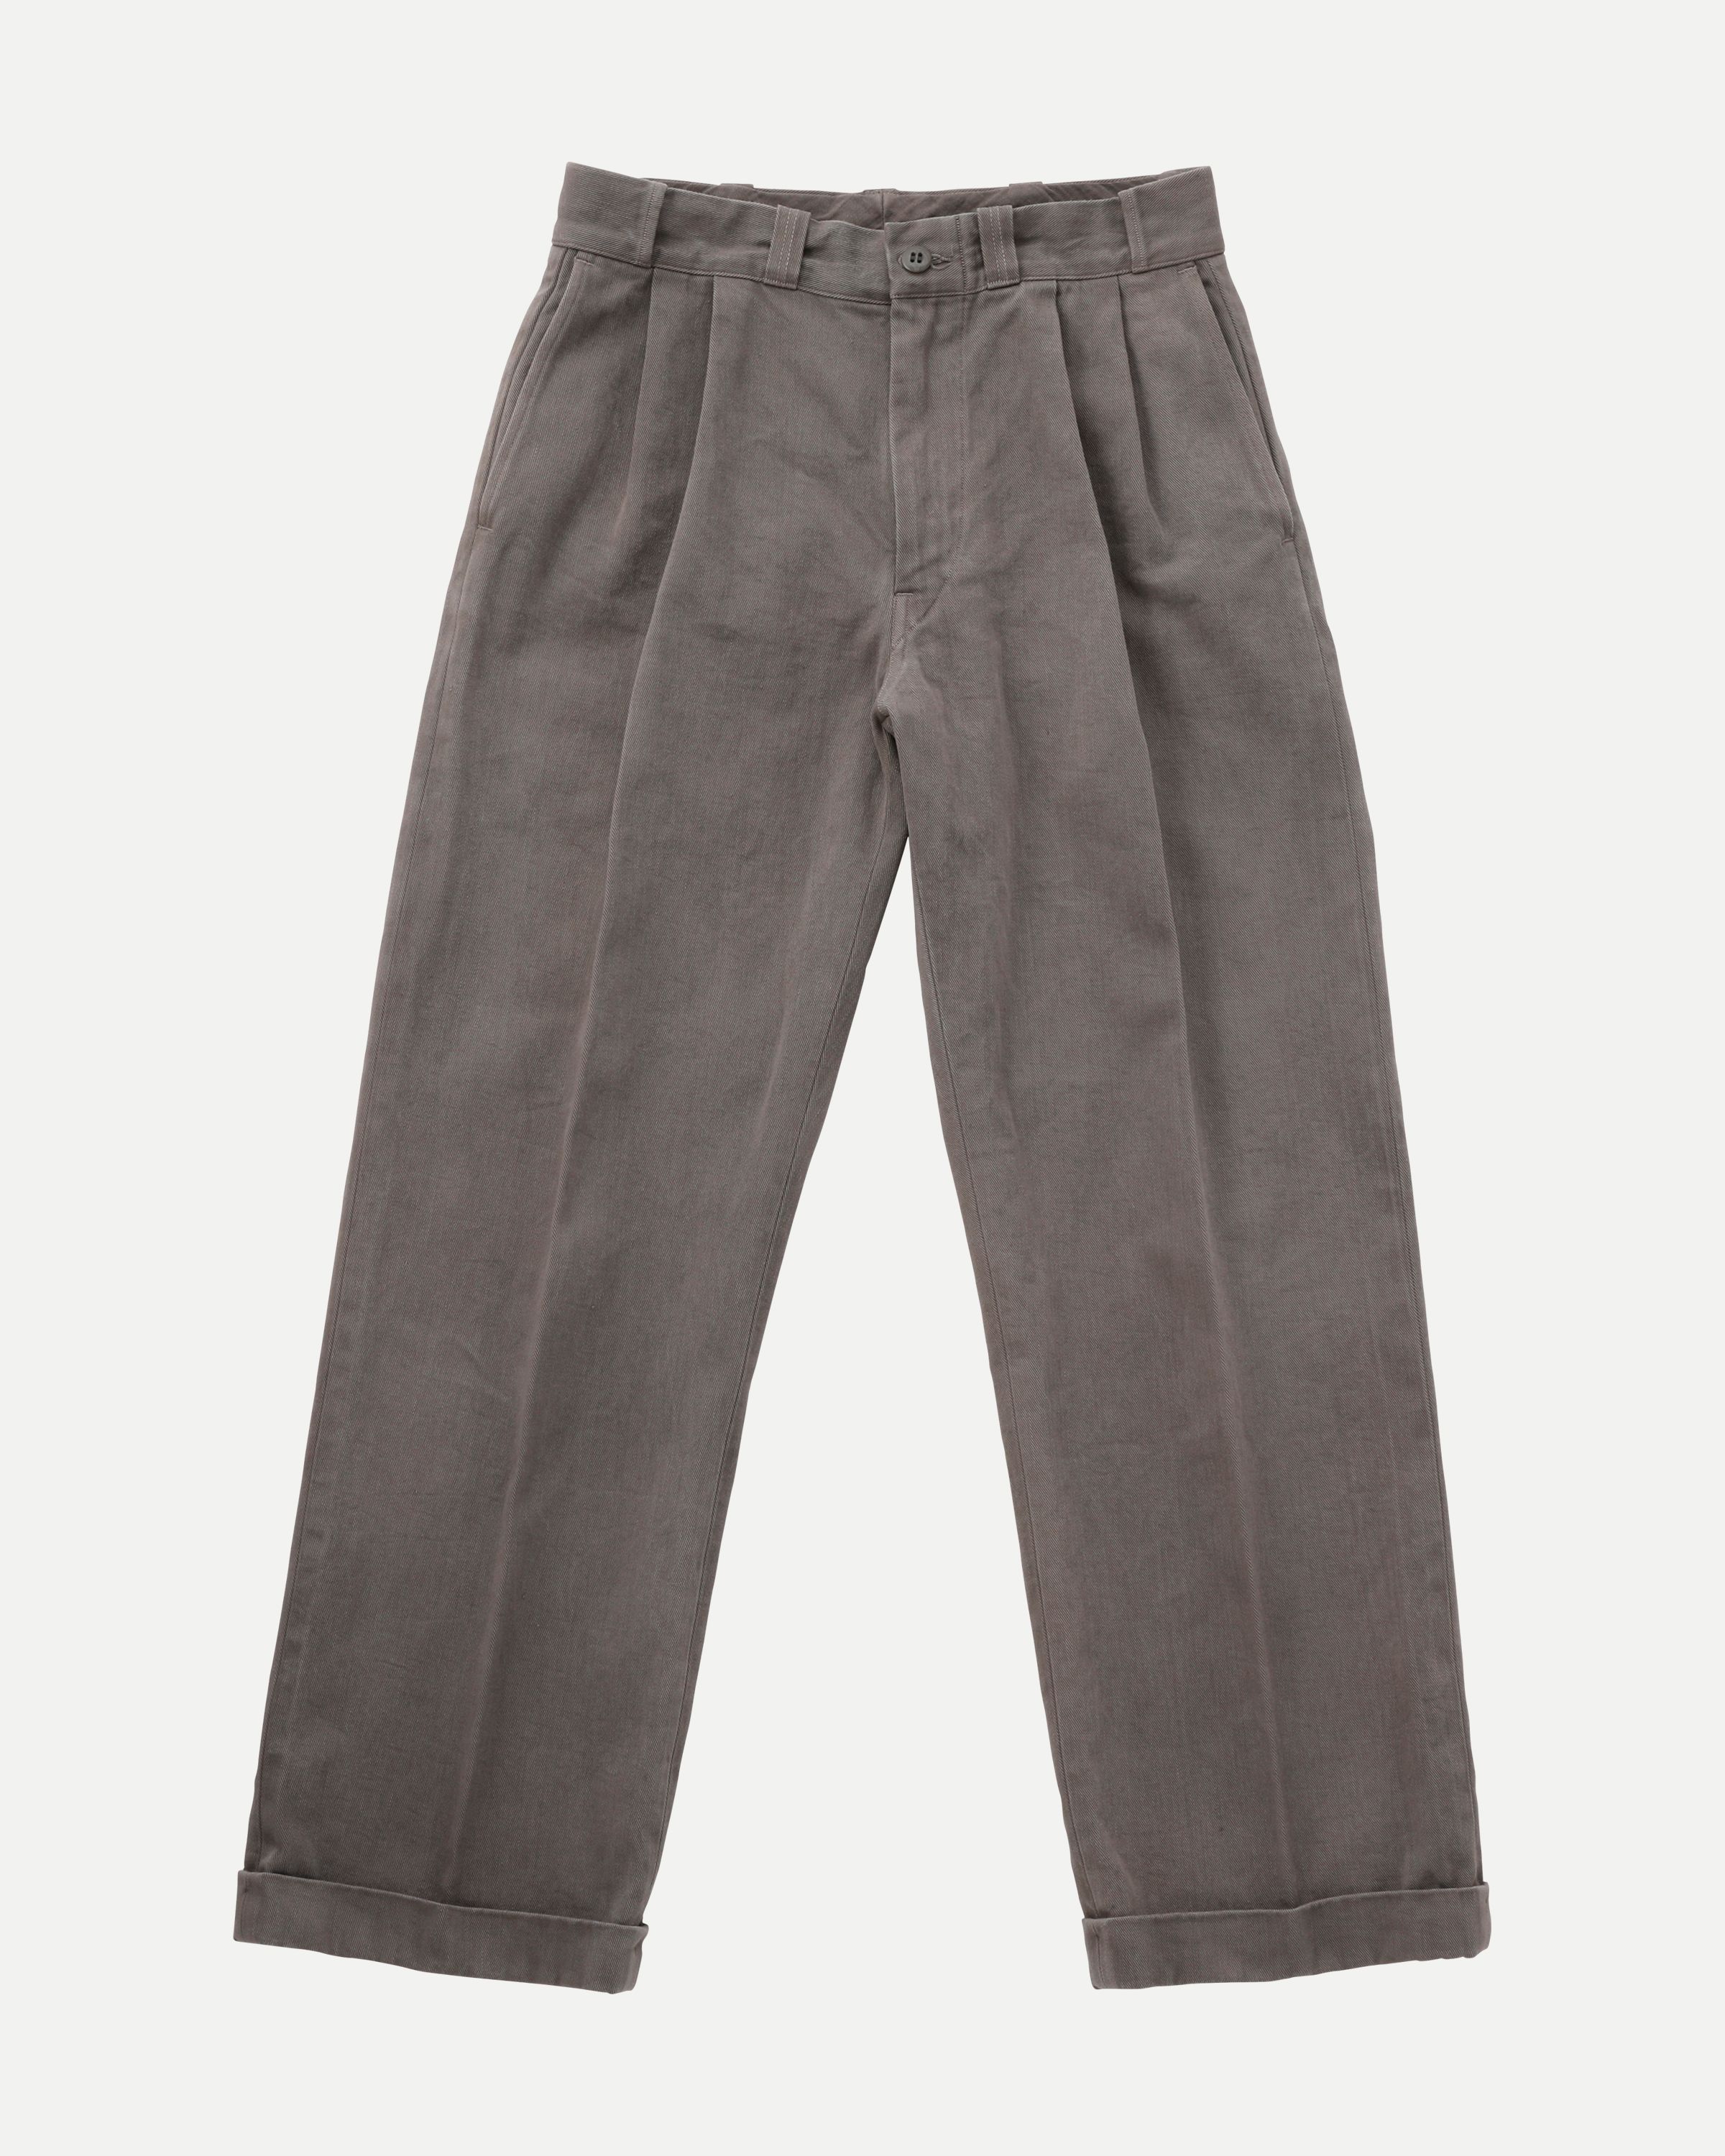 WORK TROUSERS (LOT 201)